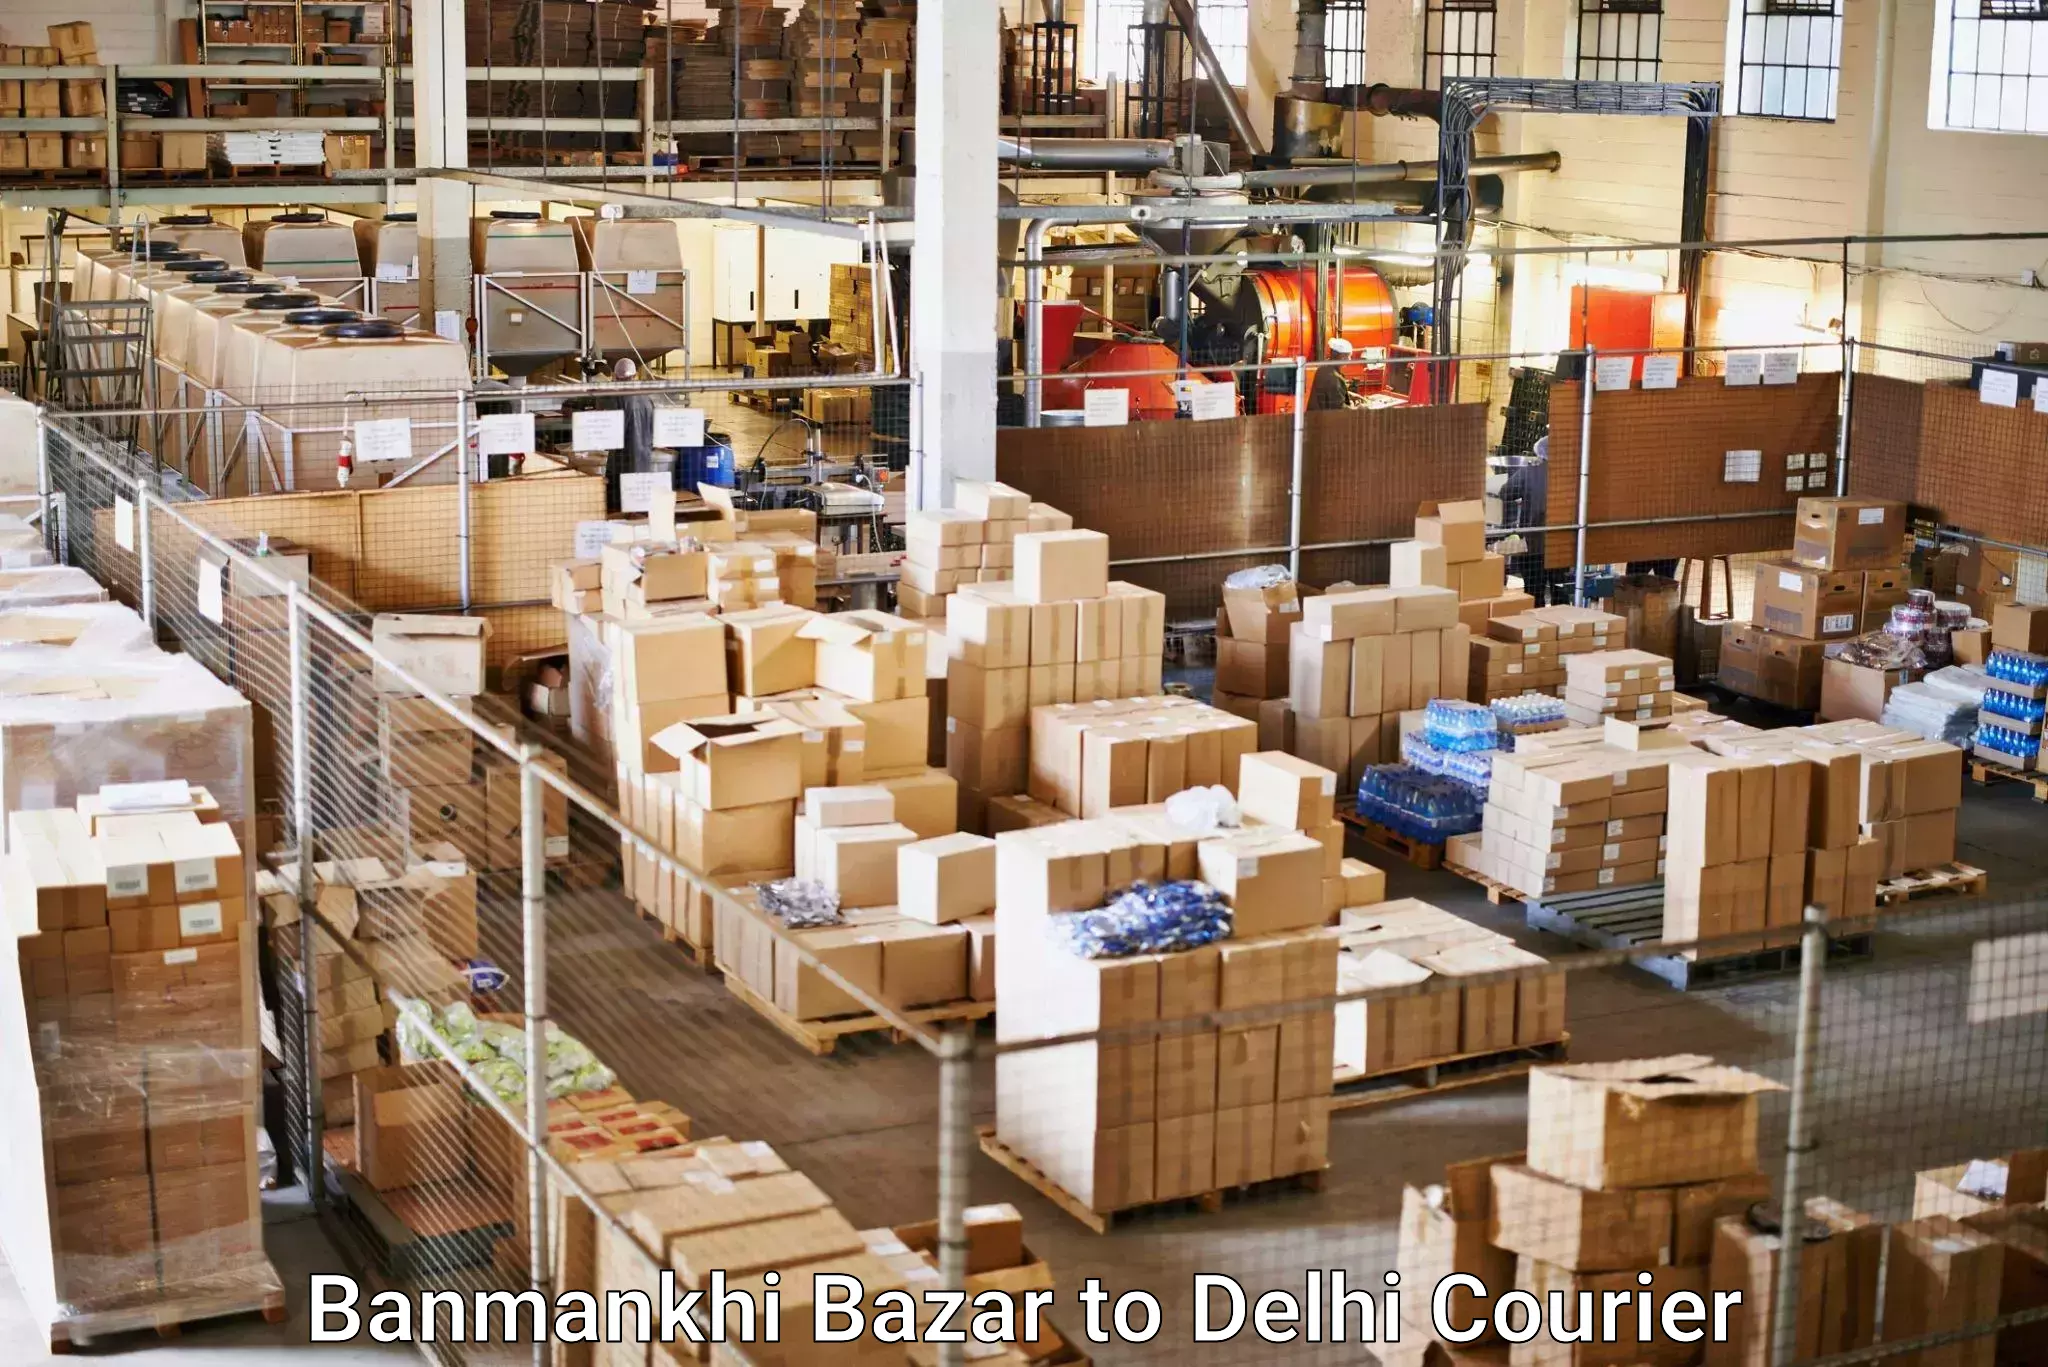 Trackable shipping service Banmankhi Bazar to Lodhi Road